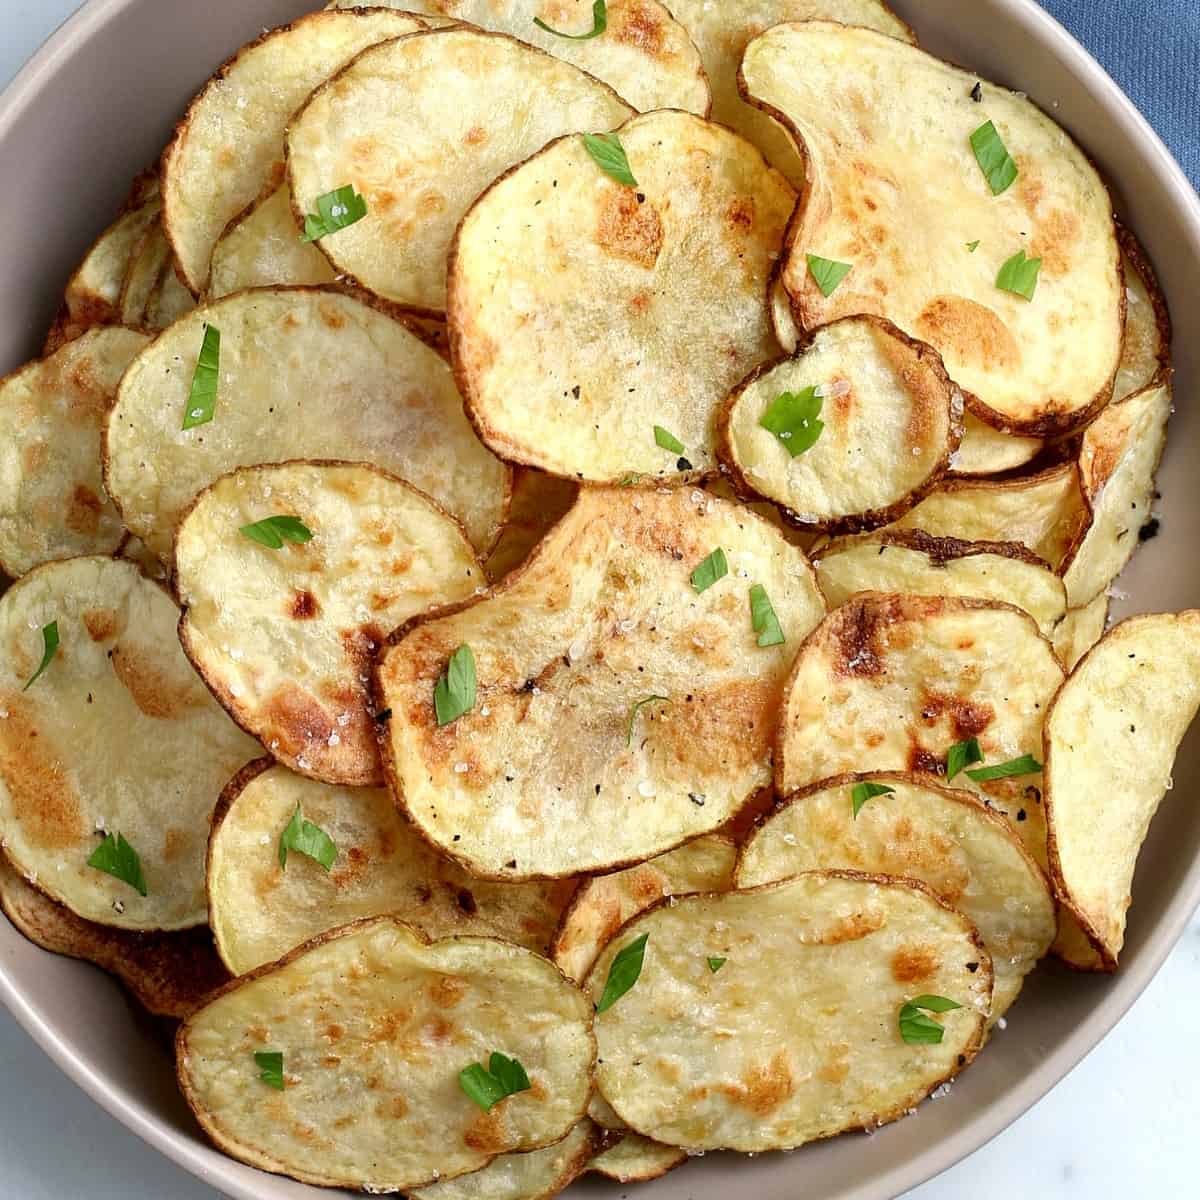 A bowl full of homemade potato chips with their skins on.